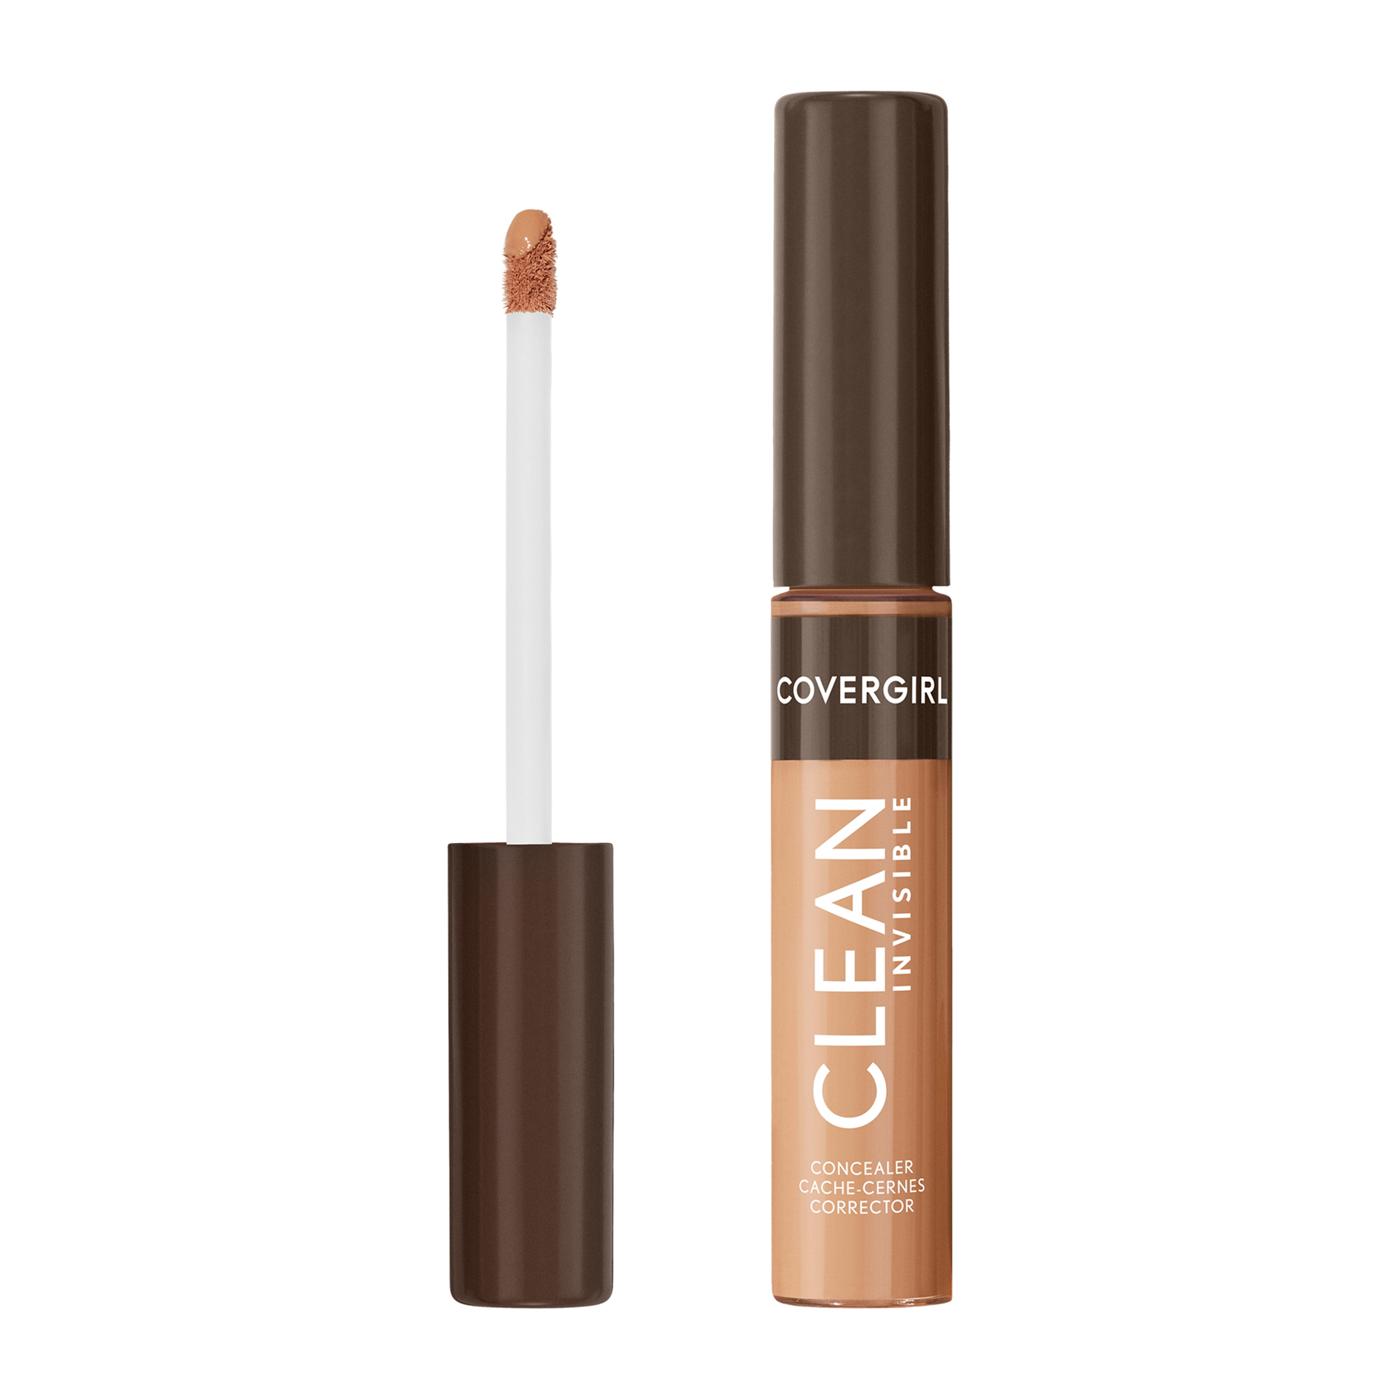 Covergirl Clean Invisible Concealer - Classic Tan; image 8 of 15